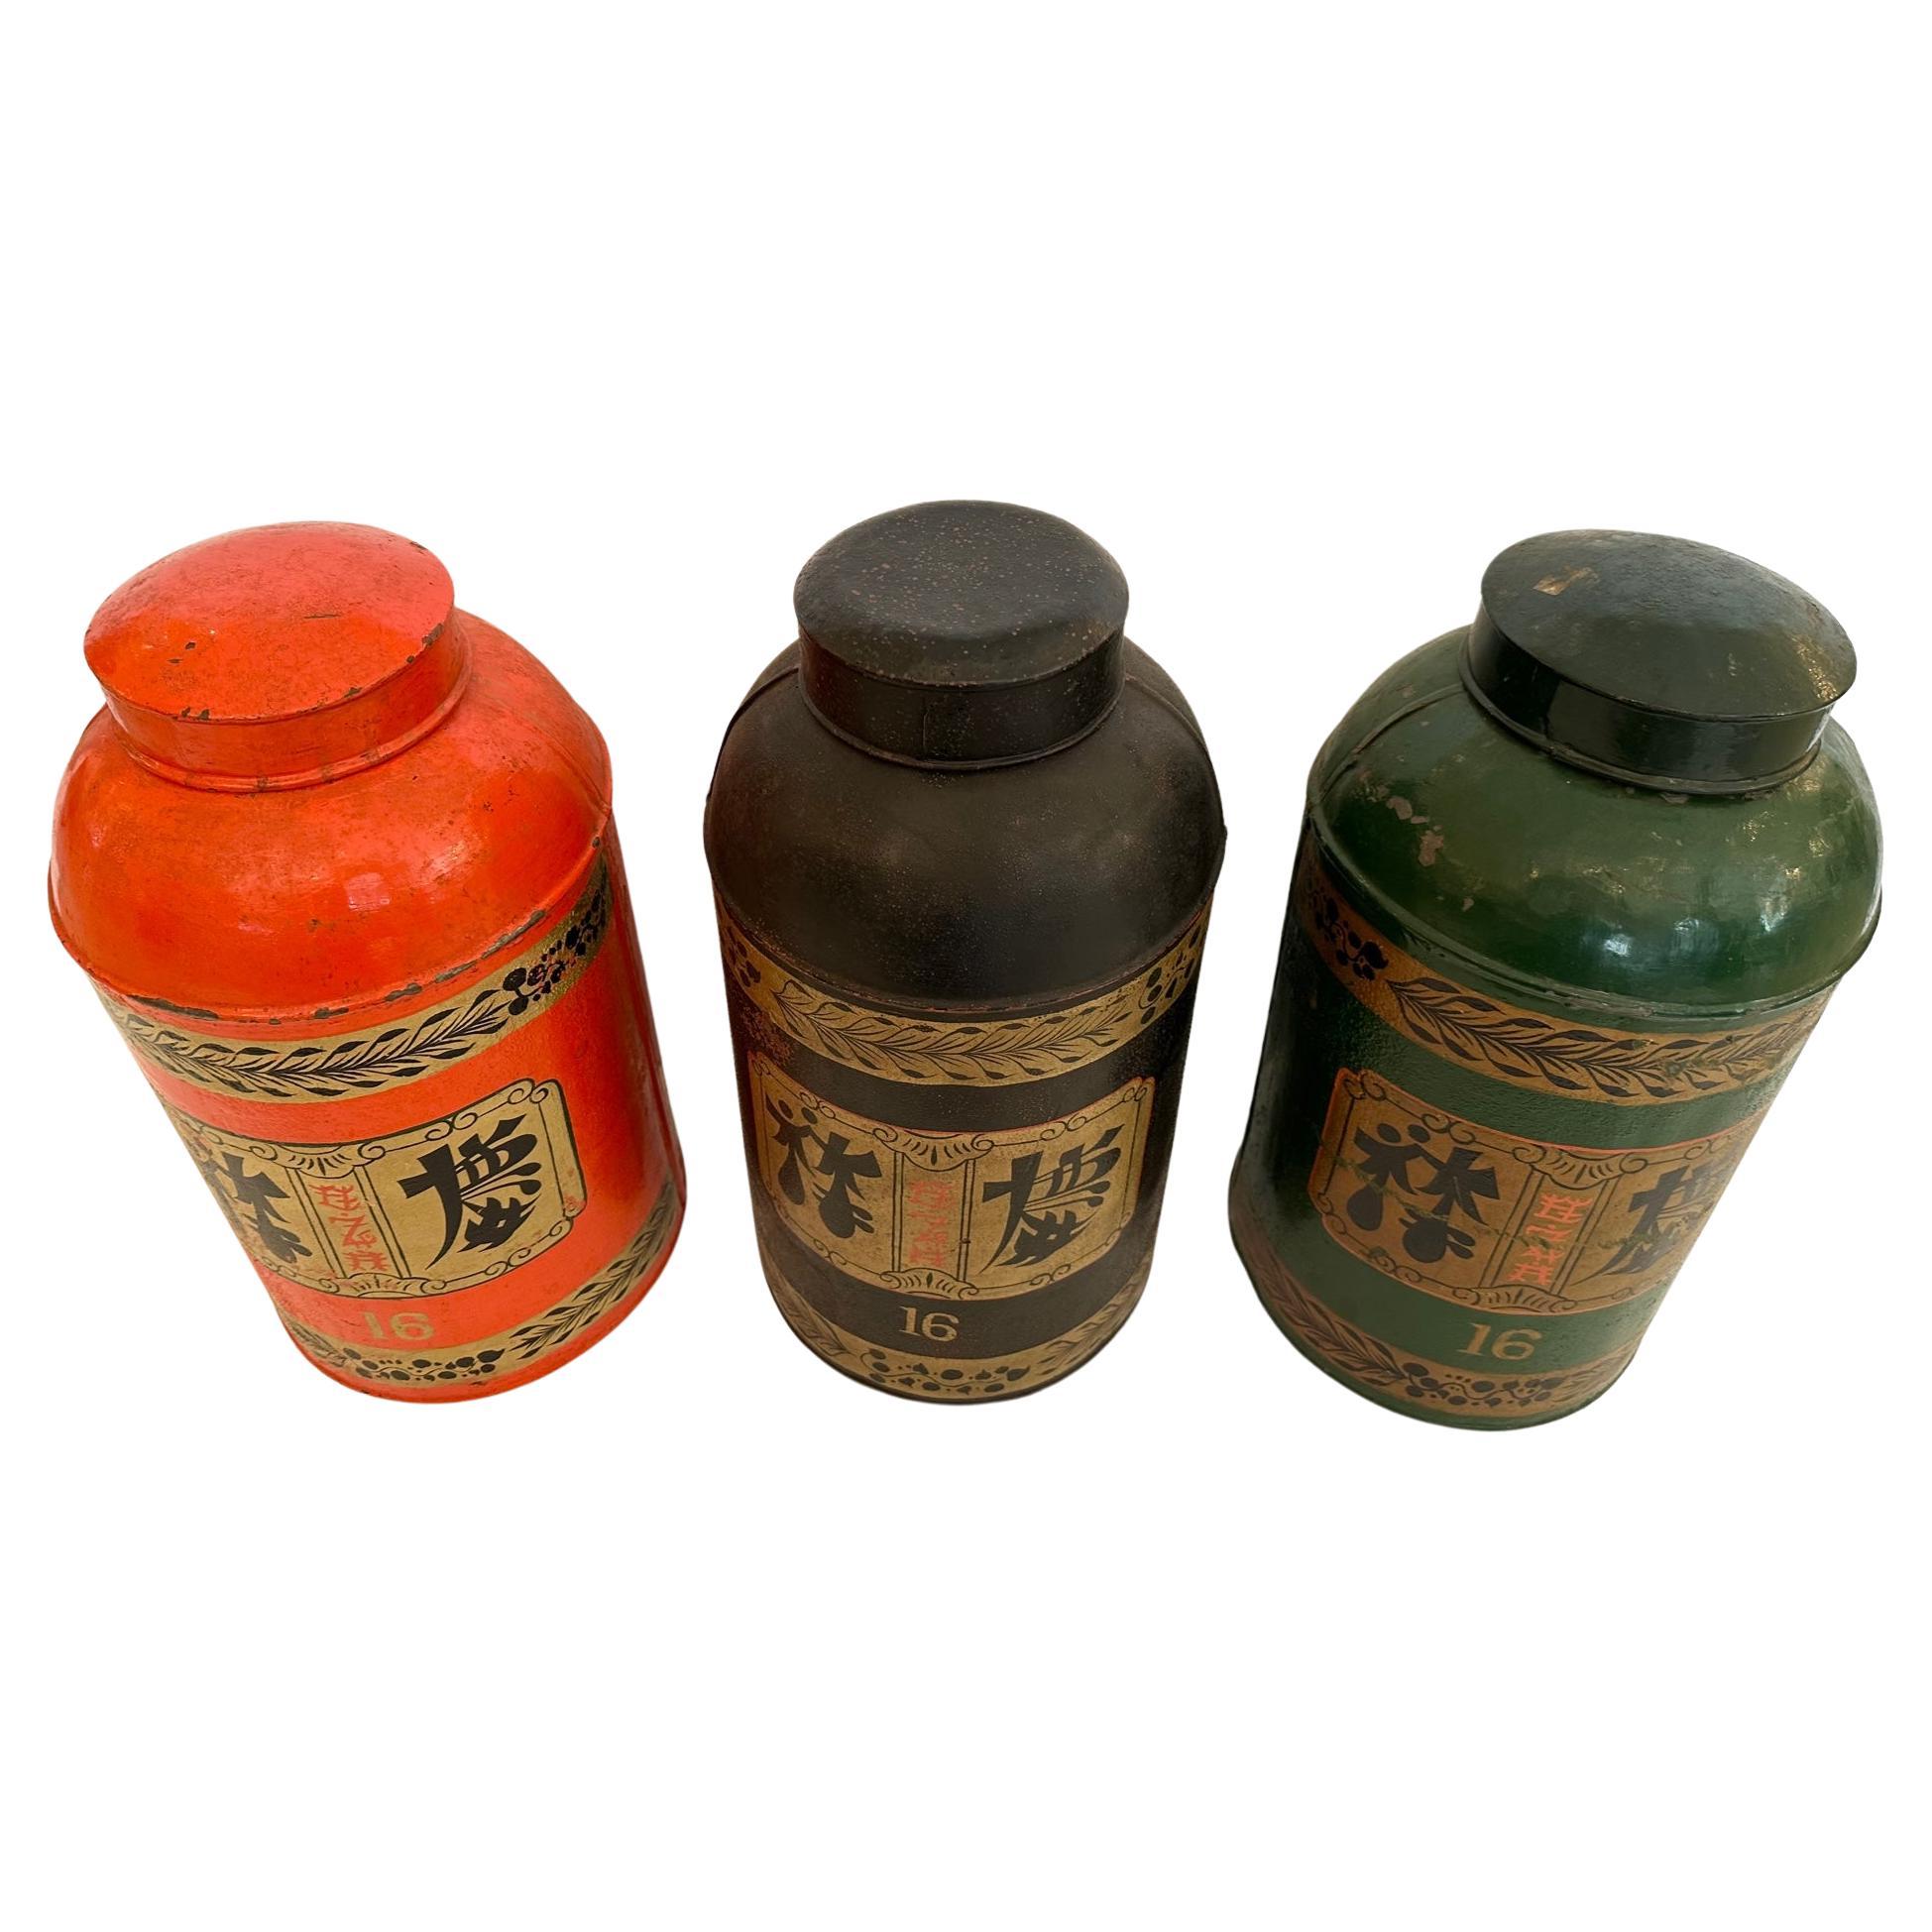 Striking large set of 3 antique metal hand painted Chinese tea canisters having wonderful graphic decoration.  Colors are orange, black and green.